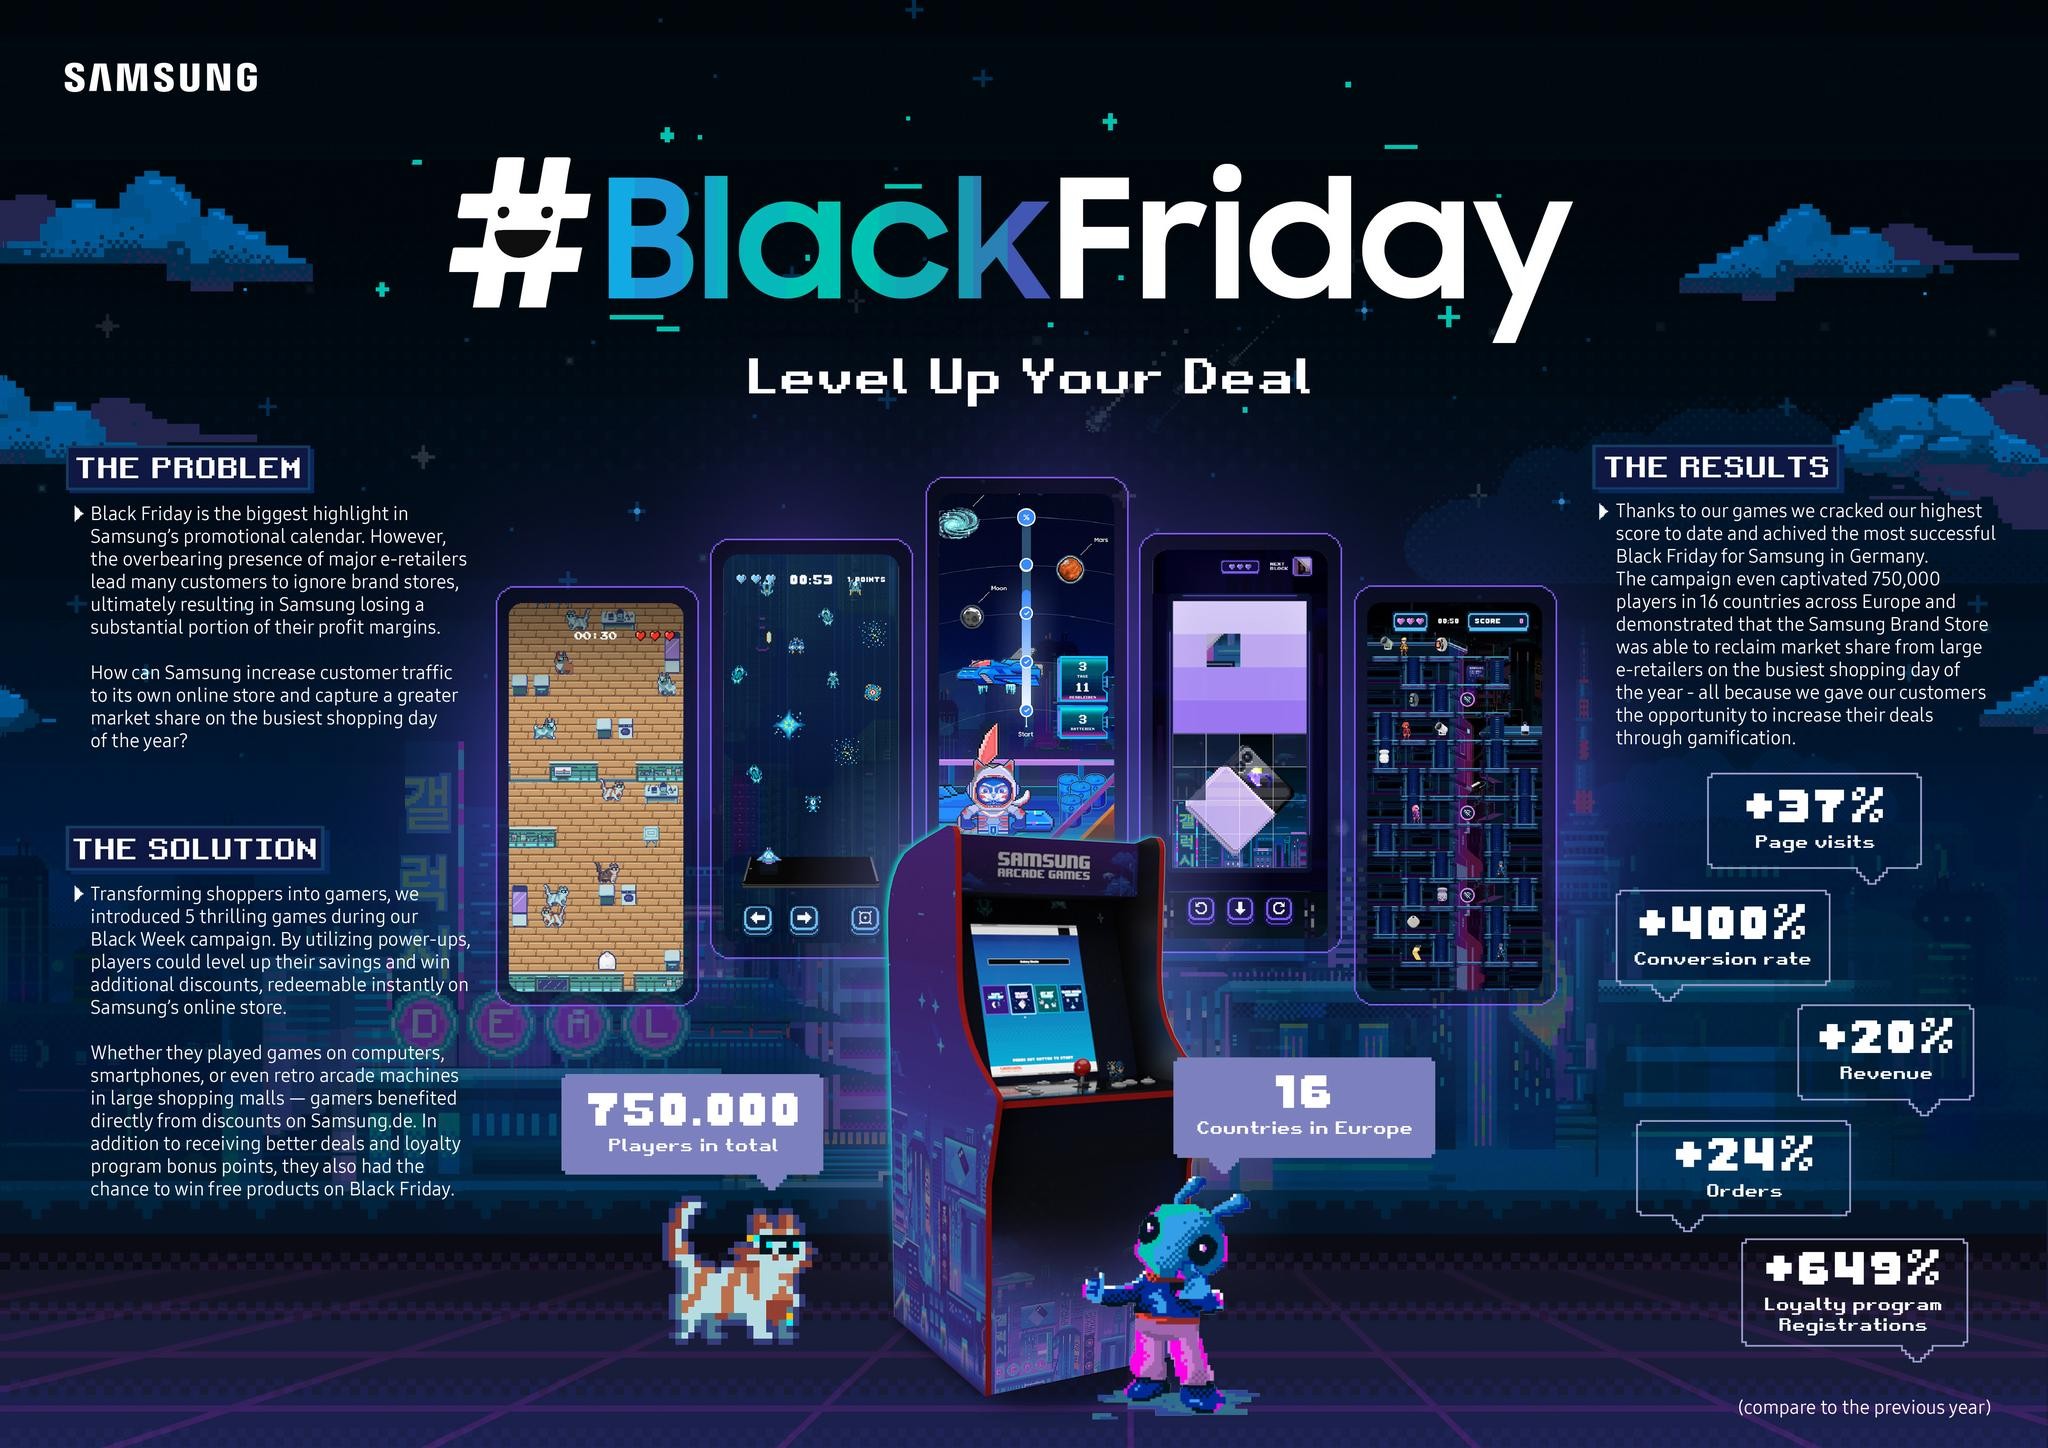 SAMSUNG BLACK FRIDAY - LEVEL UP YOUR DEAL